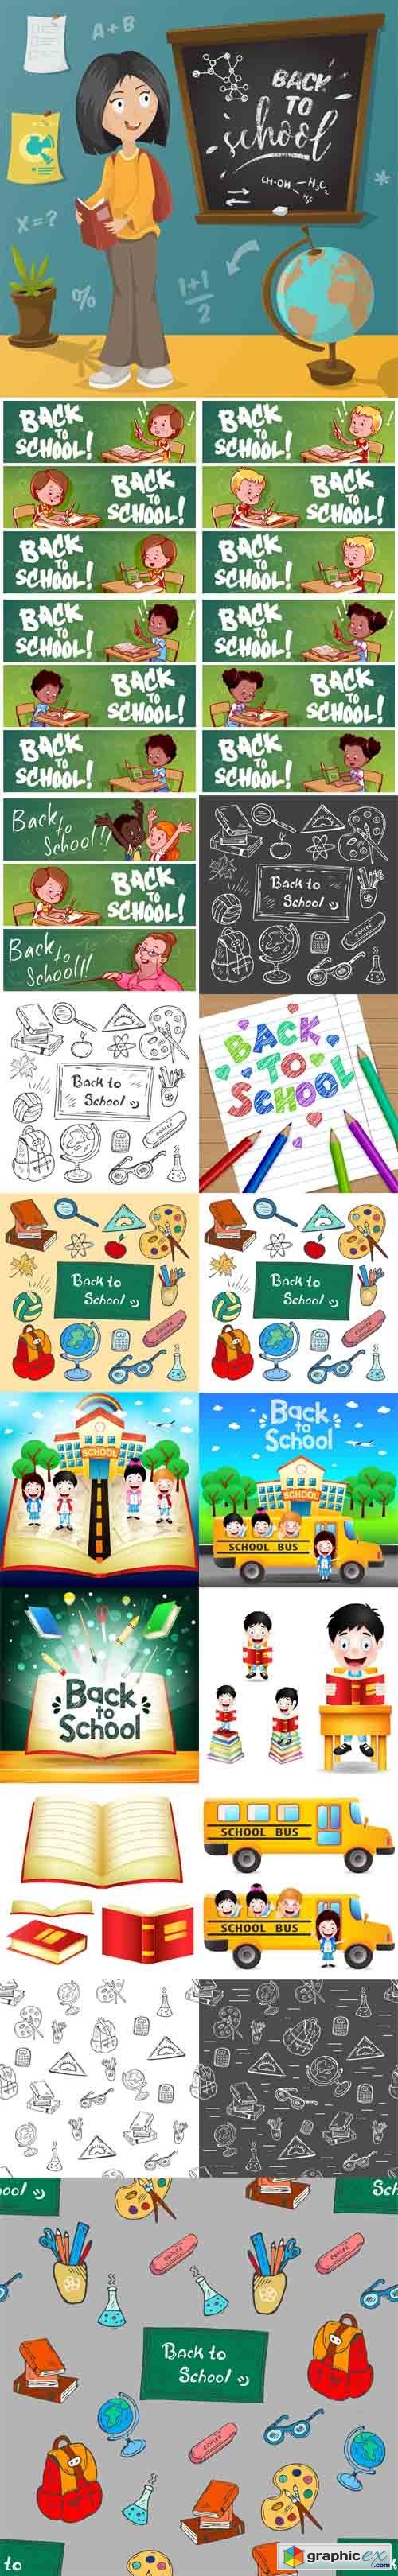 Back to School Illustrations and Elements